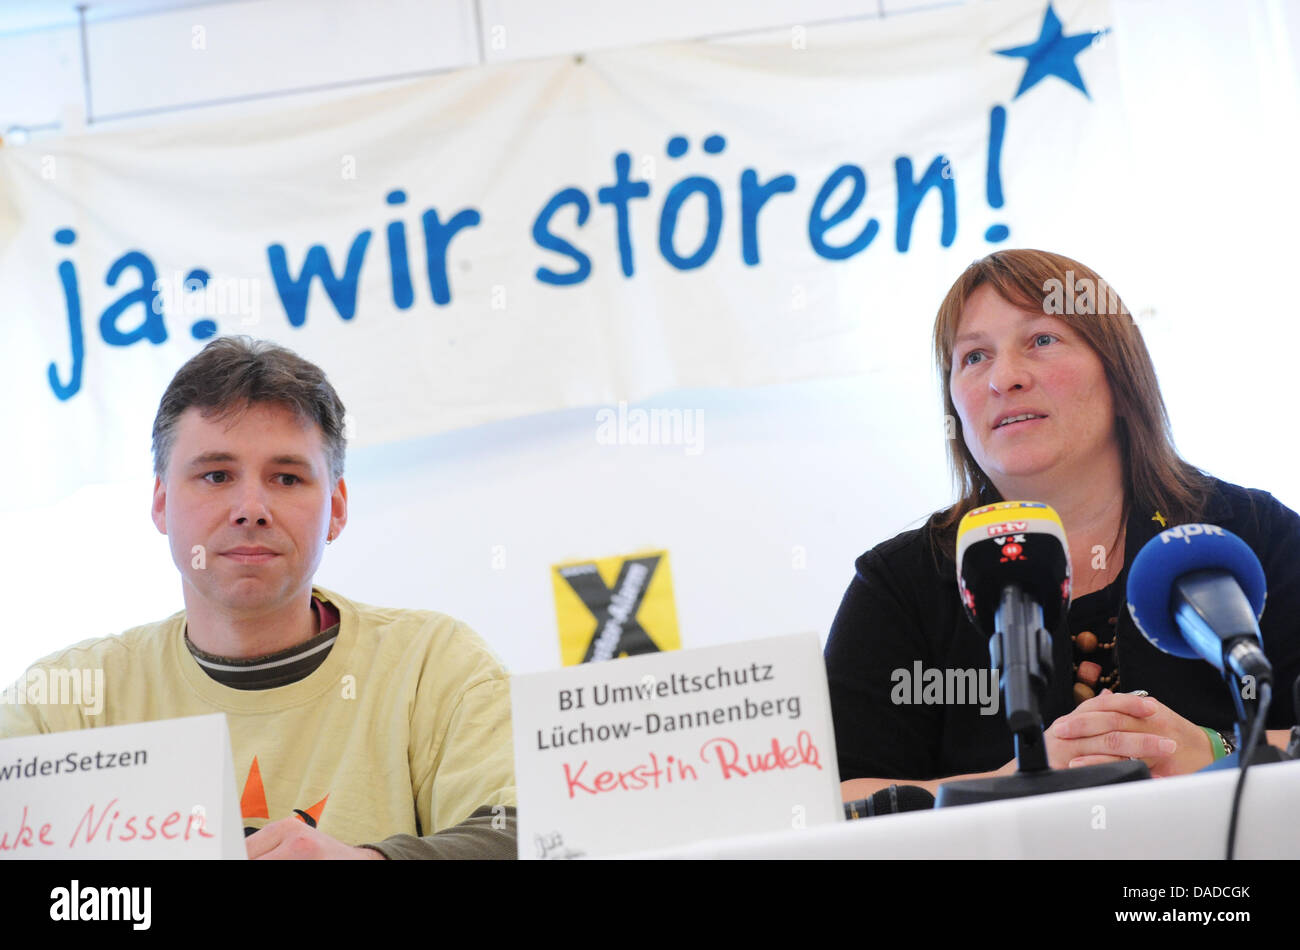 Hauke Nissen (L, widerSetzen) and Kerstin Rudek (Citizen's initiative environment protection Luechow-Dannenberg) attend a press conference of activist groups against castor transports in Hanover, Germany, 17 October 2011. The nuclear waste transport to the intermediate-storage facility in Gorleben will probably take place in November. The activists plan extensive protest actions. P Stock Photo